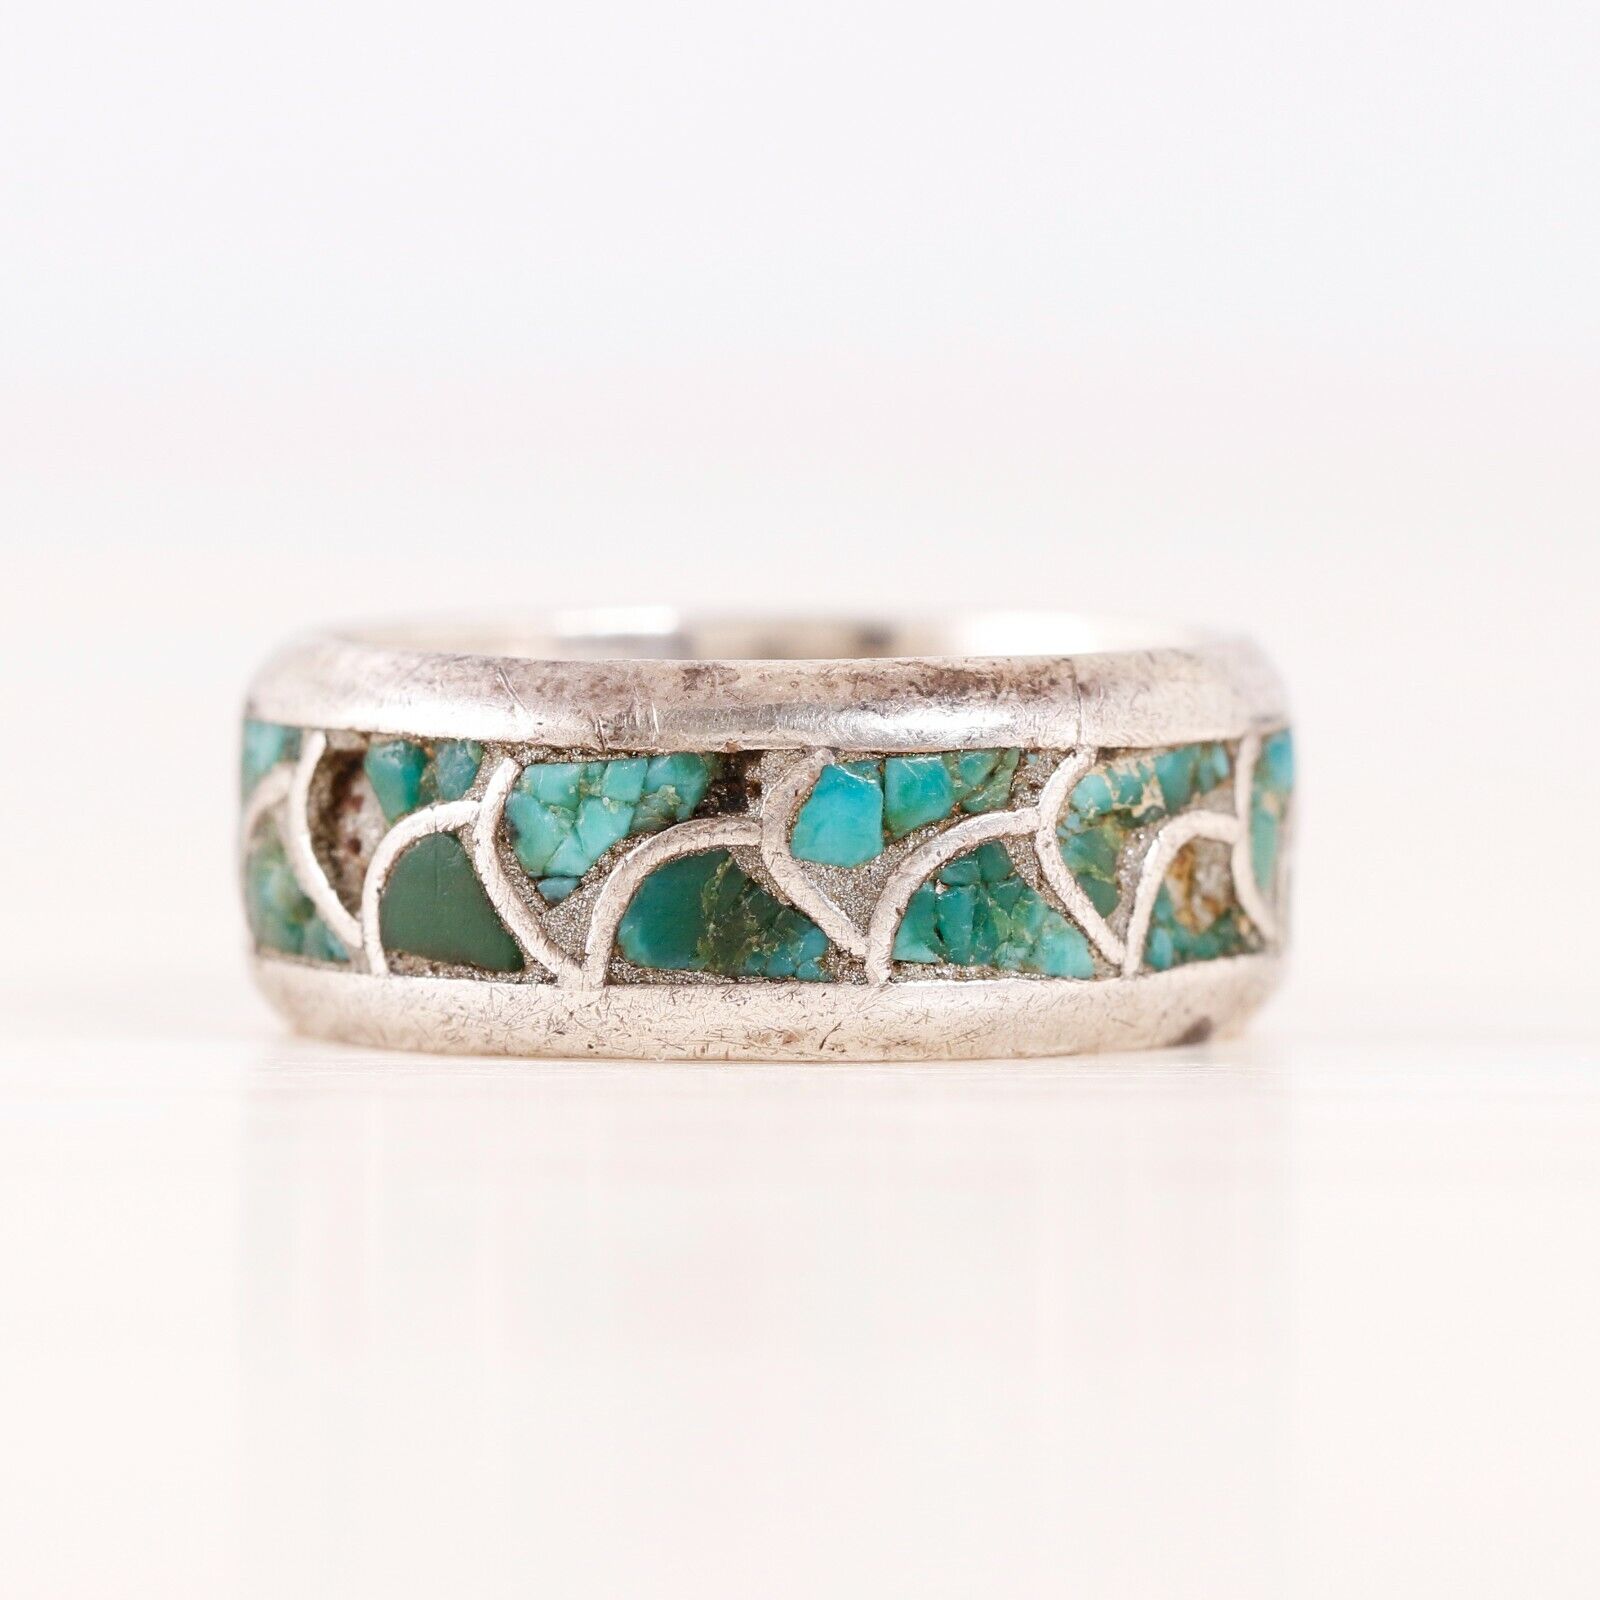 OLD PAWN ZUNI STERLING SILVER TURQUOISE FISH SCALE INLAY BAND RING SIZE 9.25